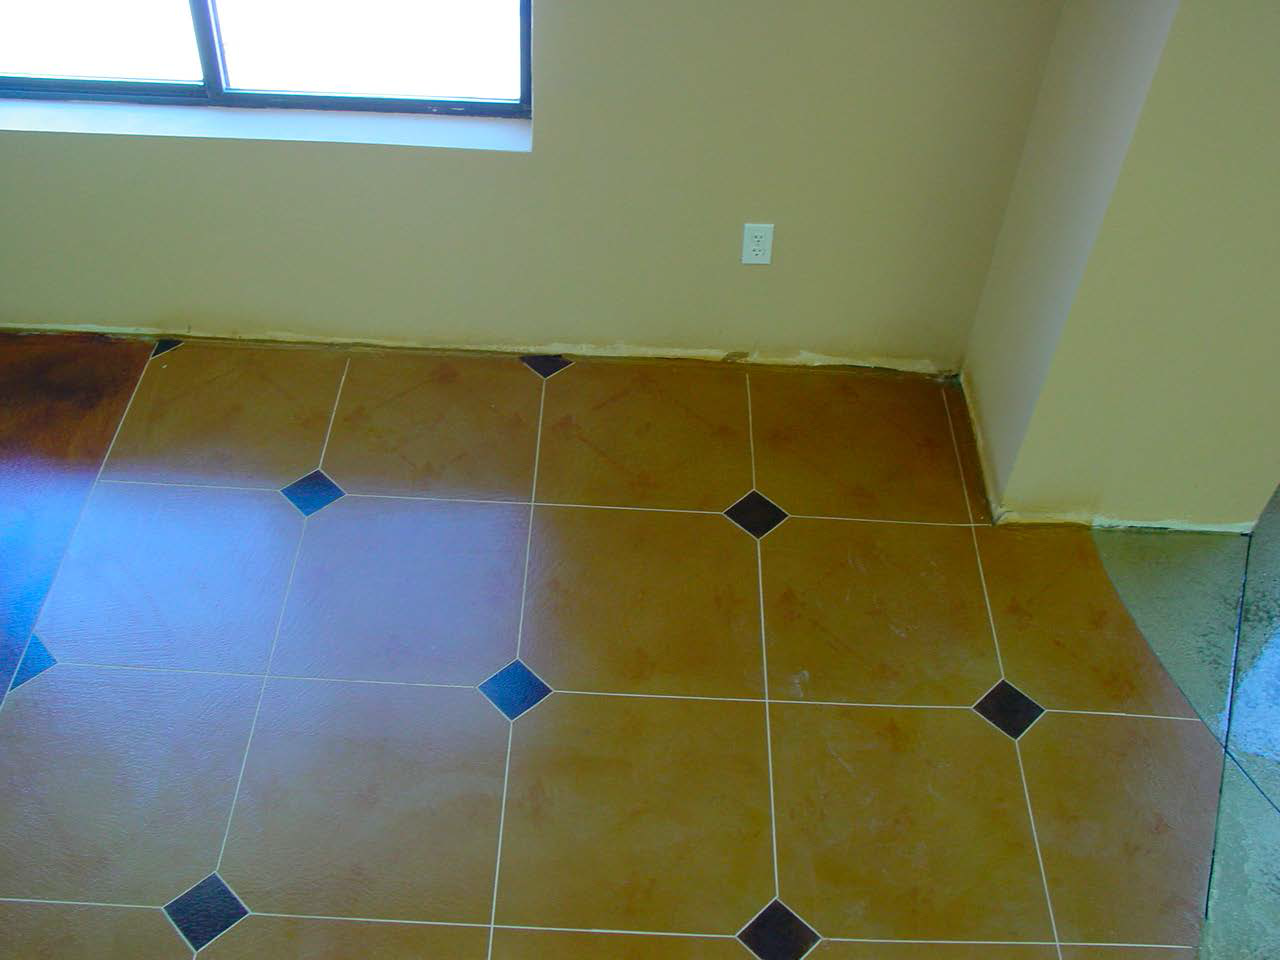 Tile like microtopping with black diamond pattern.